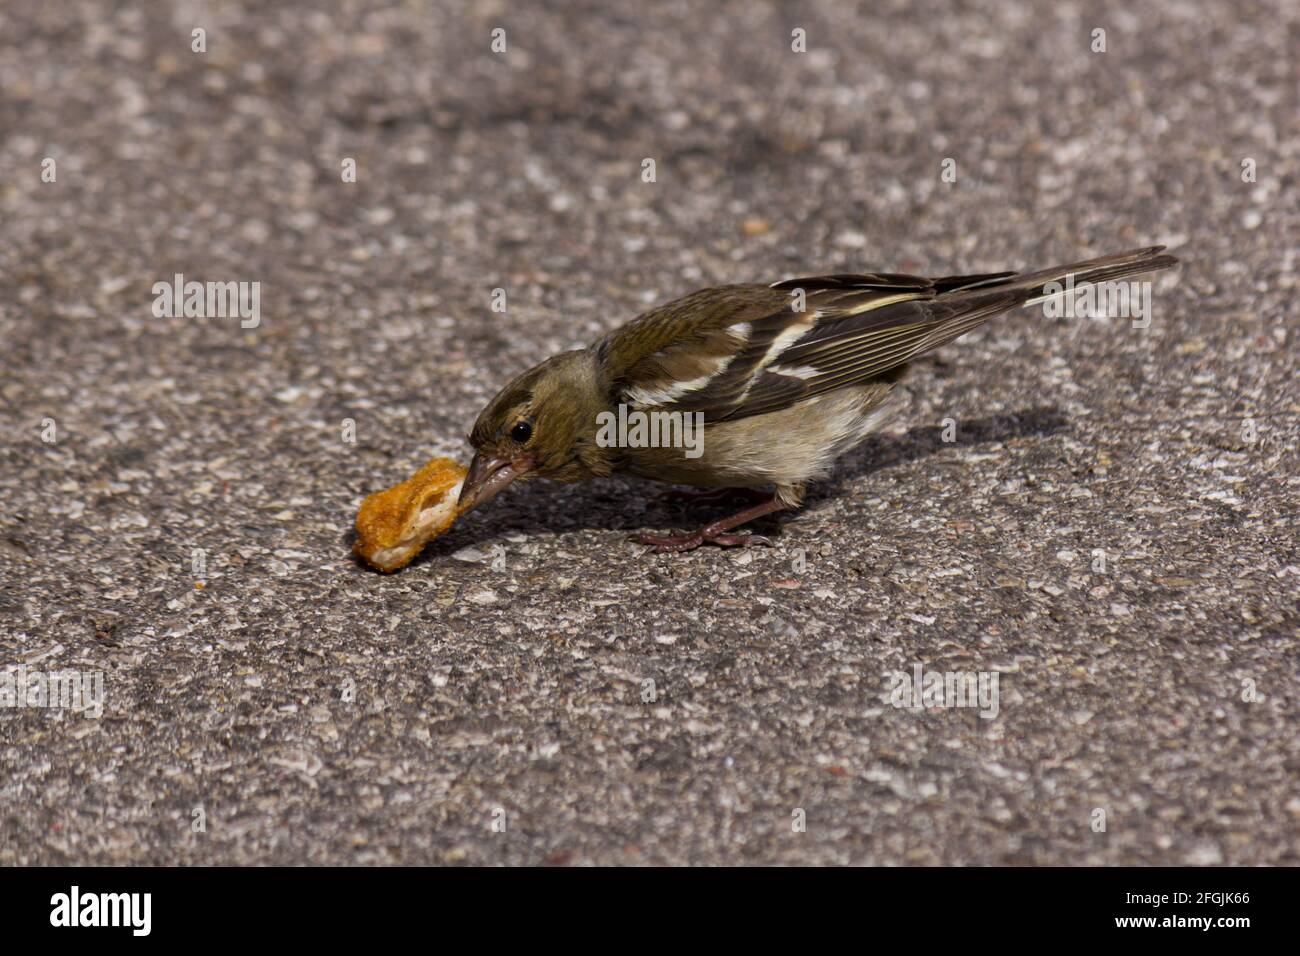 Small cute house sparrow (Passer domesticus) eating small piece of leftover food Stock Photo